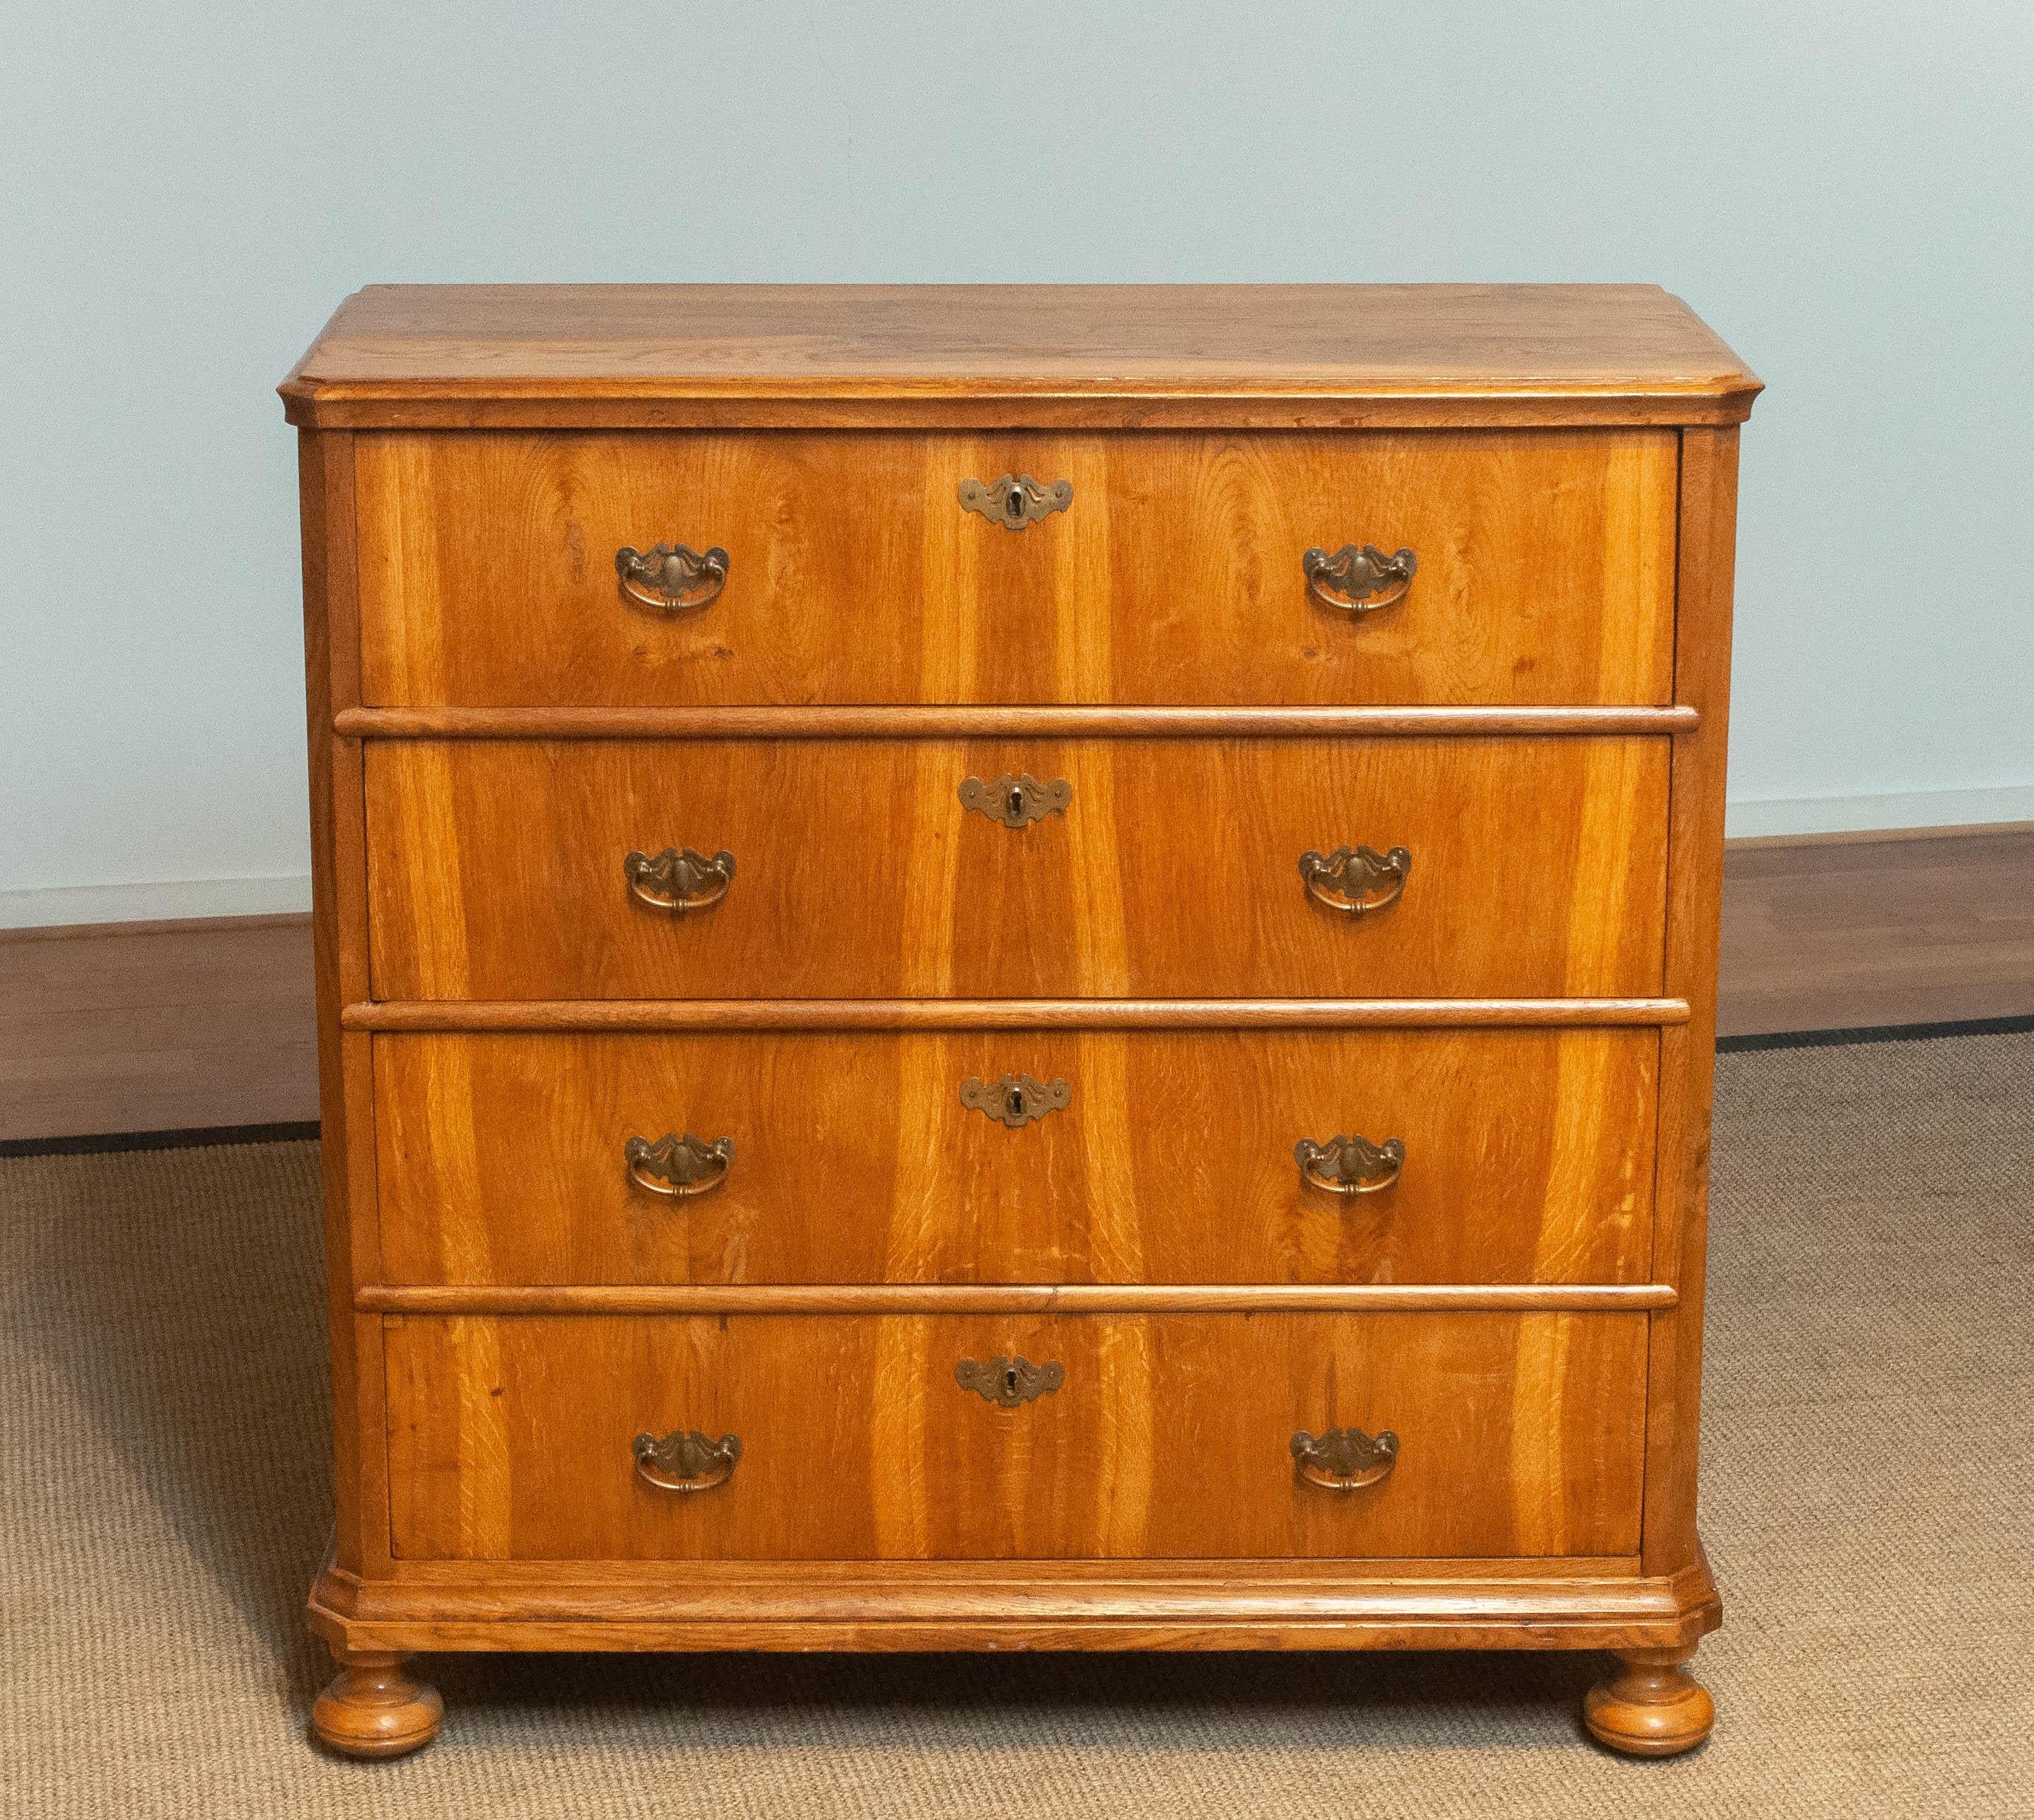 Beautiful Scandinavian craftsman commode / drawer cabinet with book matching front in oak veneer from the 18th. century. Biedermeier.
Selecting these pieces of oak for this commode and matched together makes this a absolute eye catcher for you